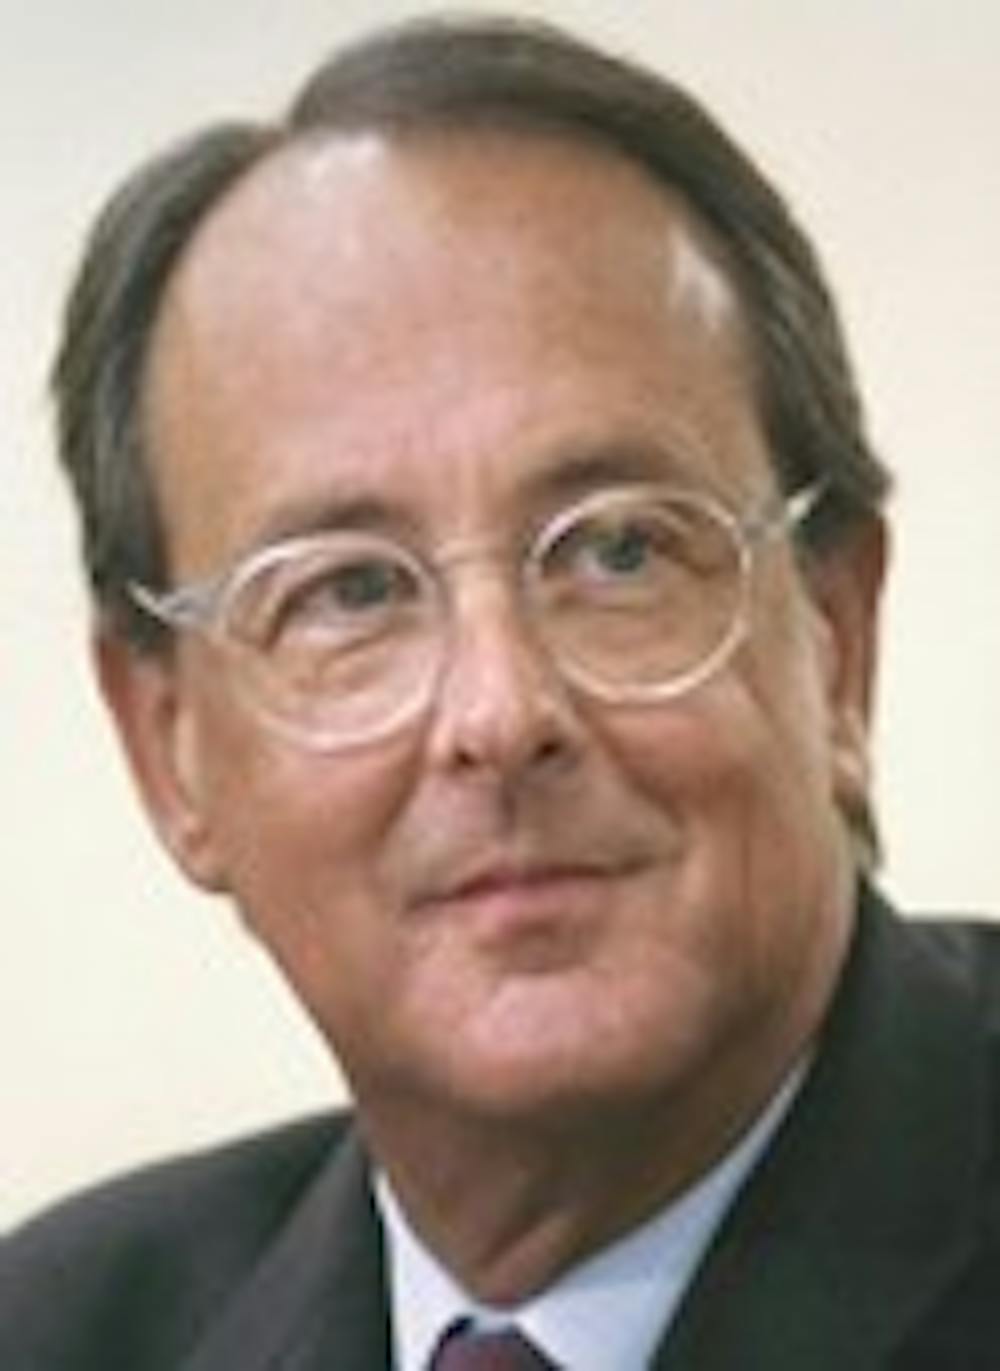 Erskine Bowles said he wants young people to be angry at the size of the deficit.